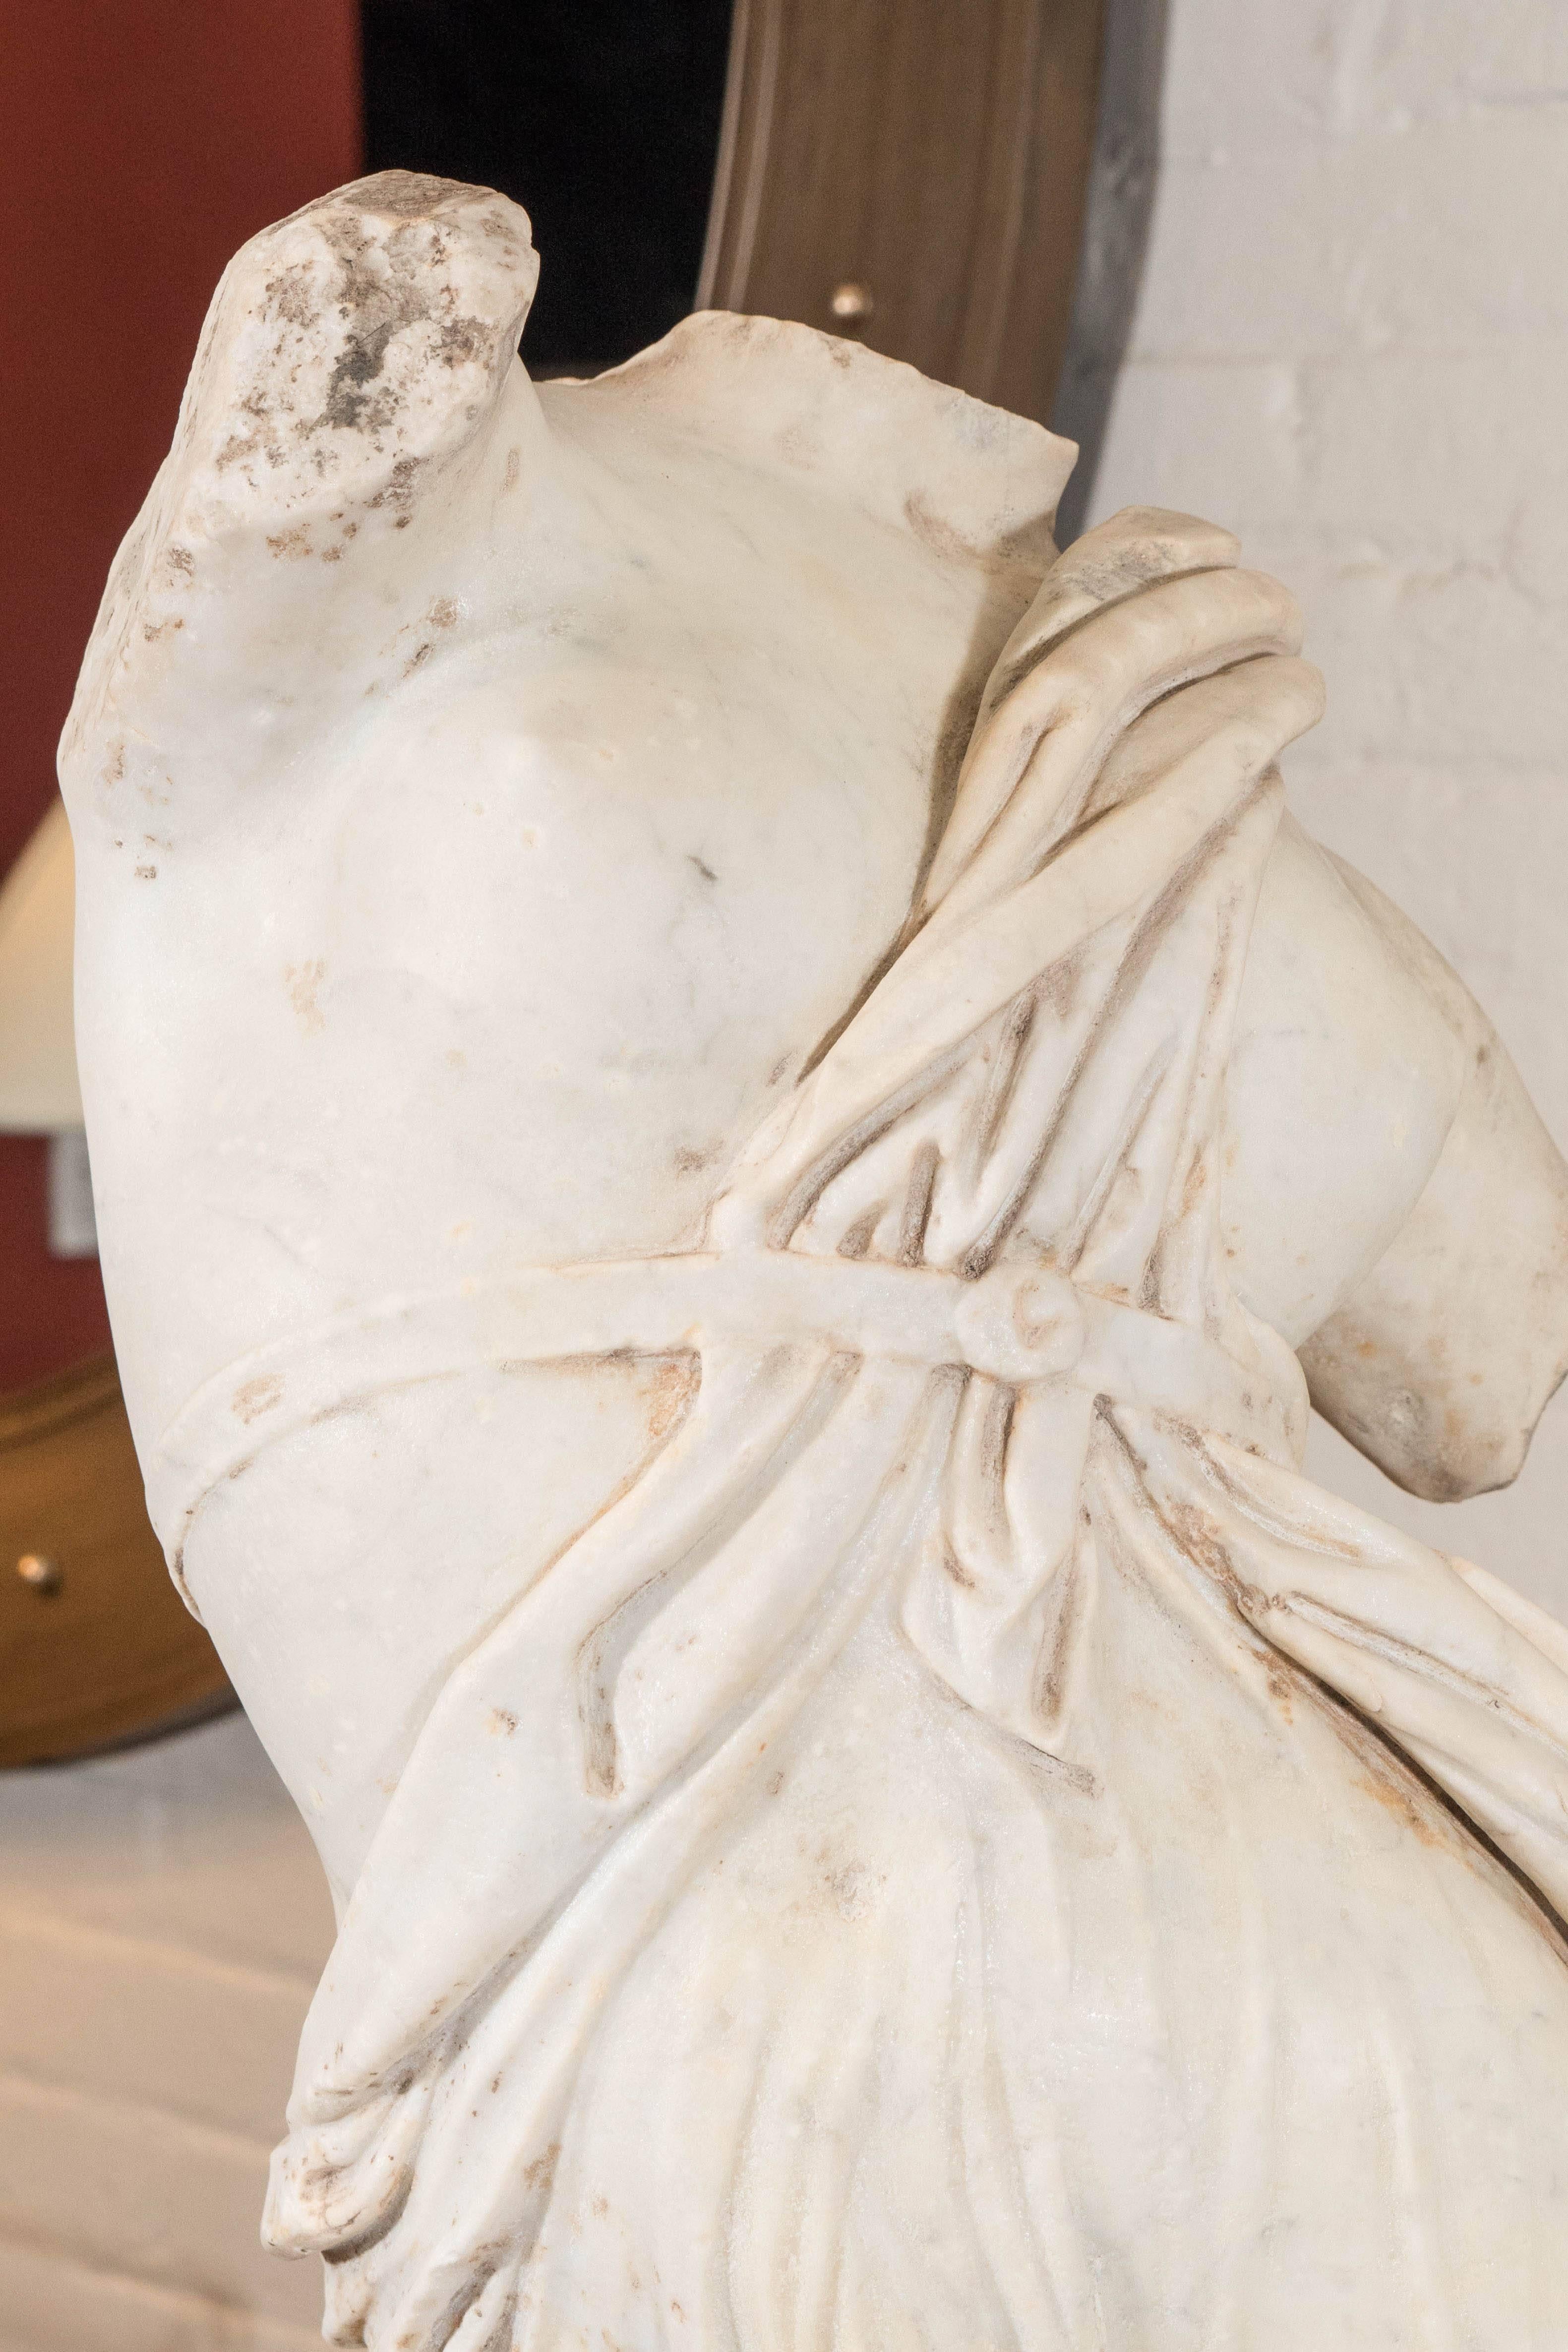 Marble torso of female maenad, a follower of Dionysus, in sensual sinuous pose with well-modeled wet drapery. Probably academy made after Skopas' raging maenad.

Measures: 32